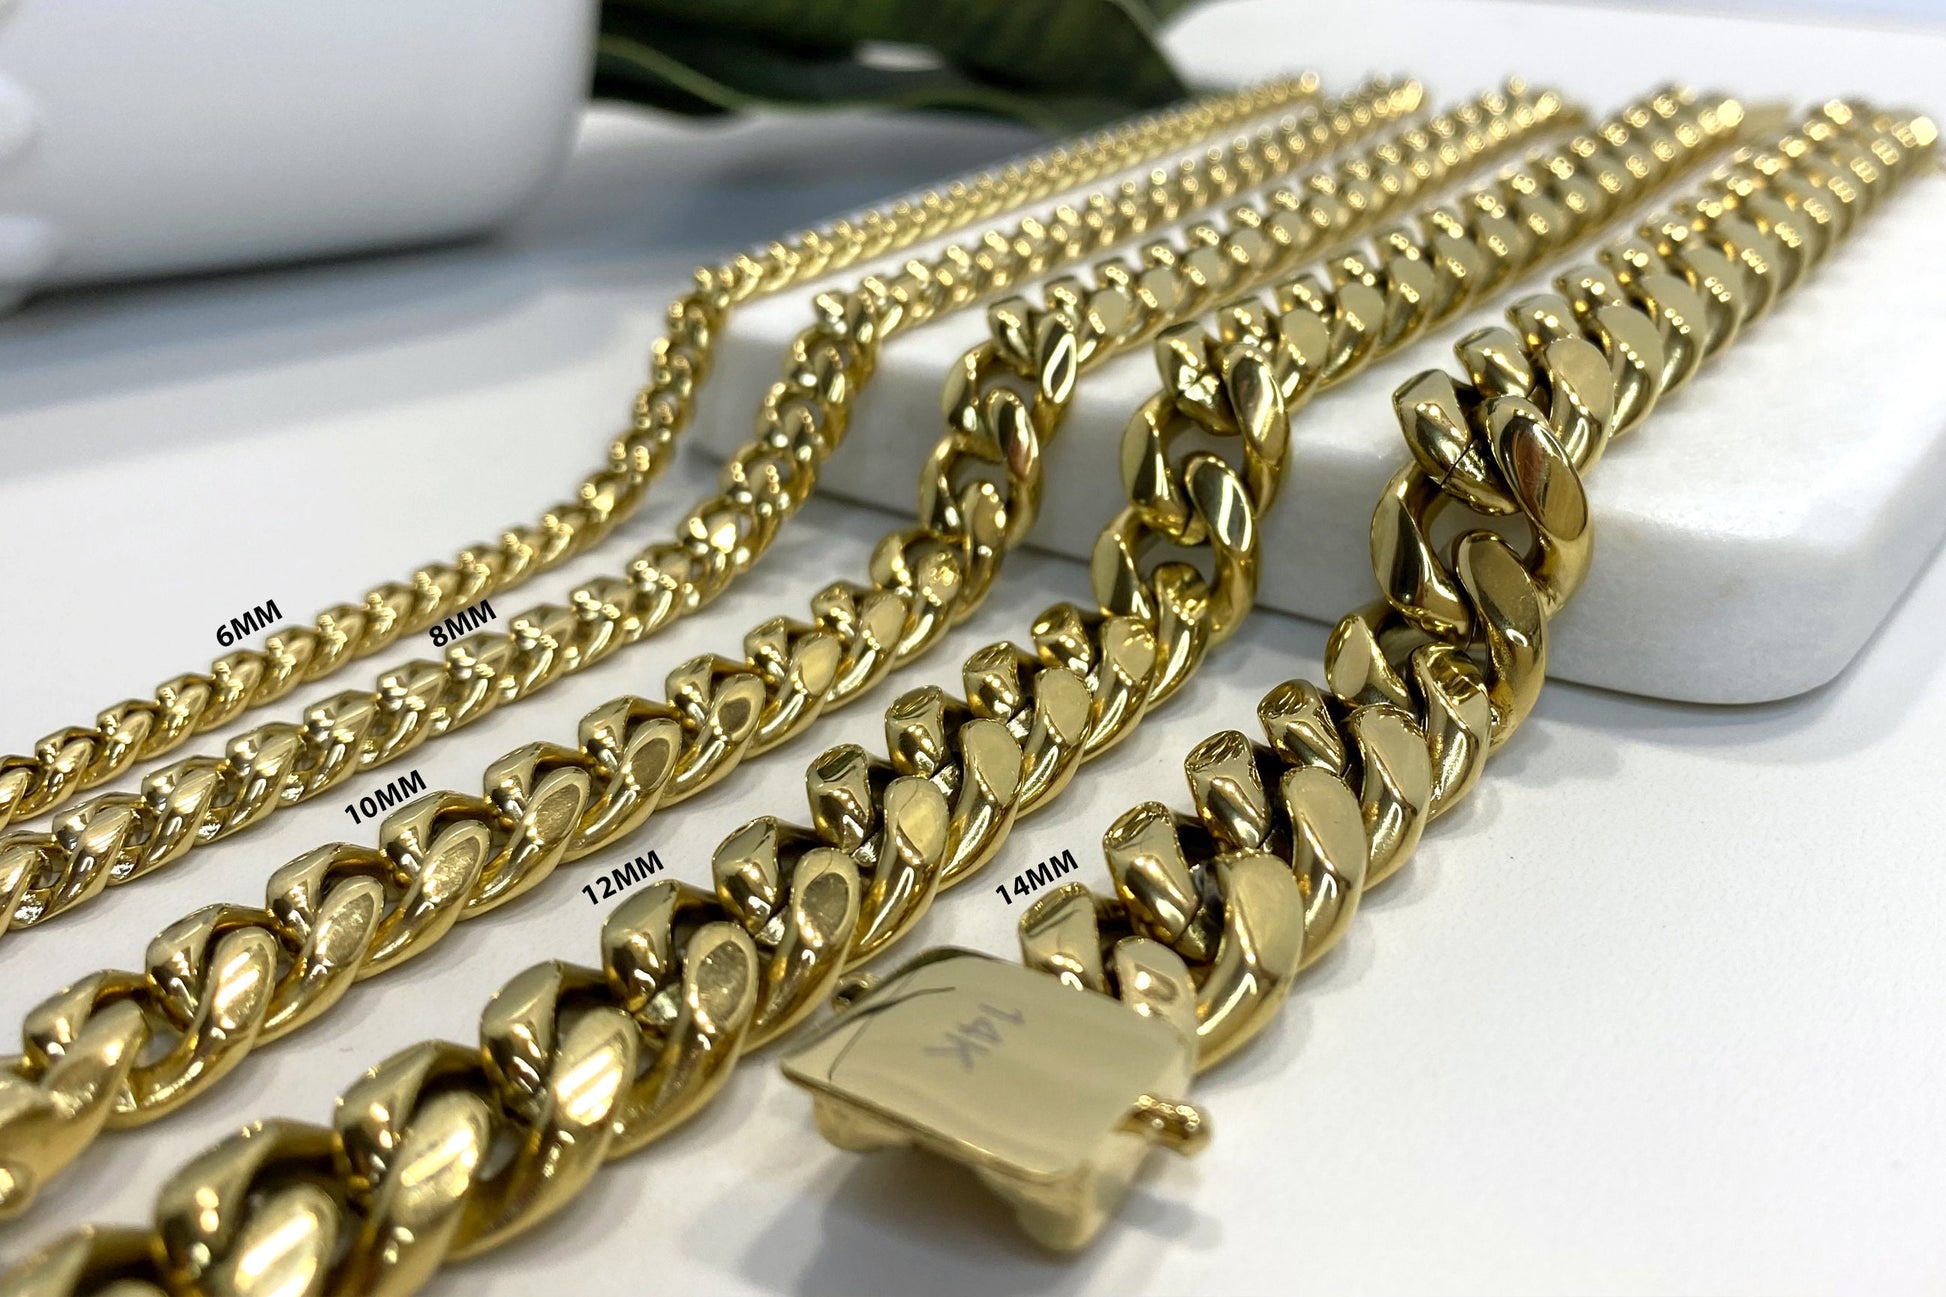 10mm Miami Cuban Chain 14k Gold Filled, Double Safety Lock Box, Chunky Curb Link Chain, Unisex Necklace, Wholesale Jewelry Supplies